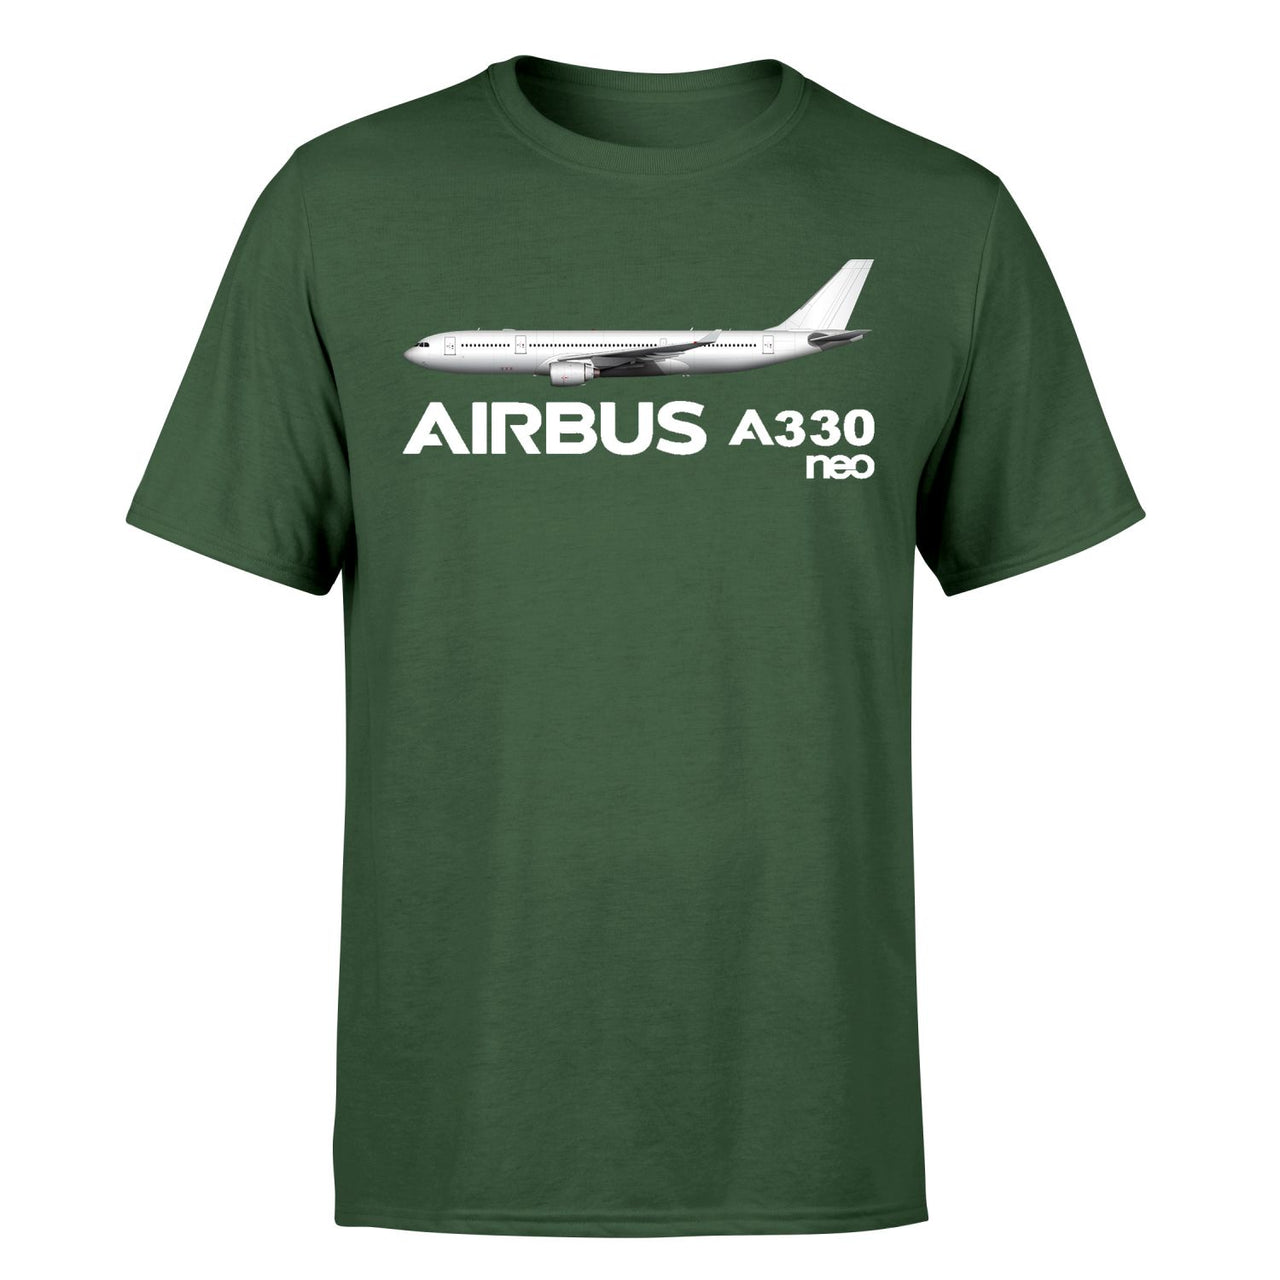 The Airbus A330neo Designed T-Shirts